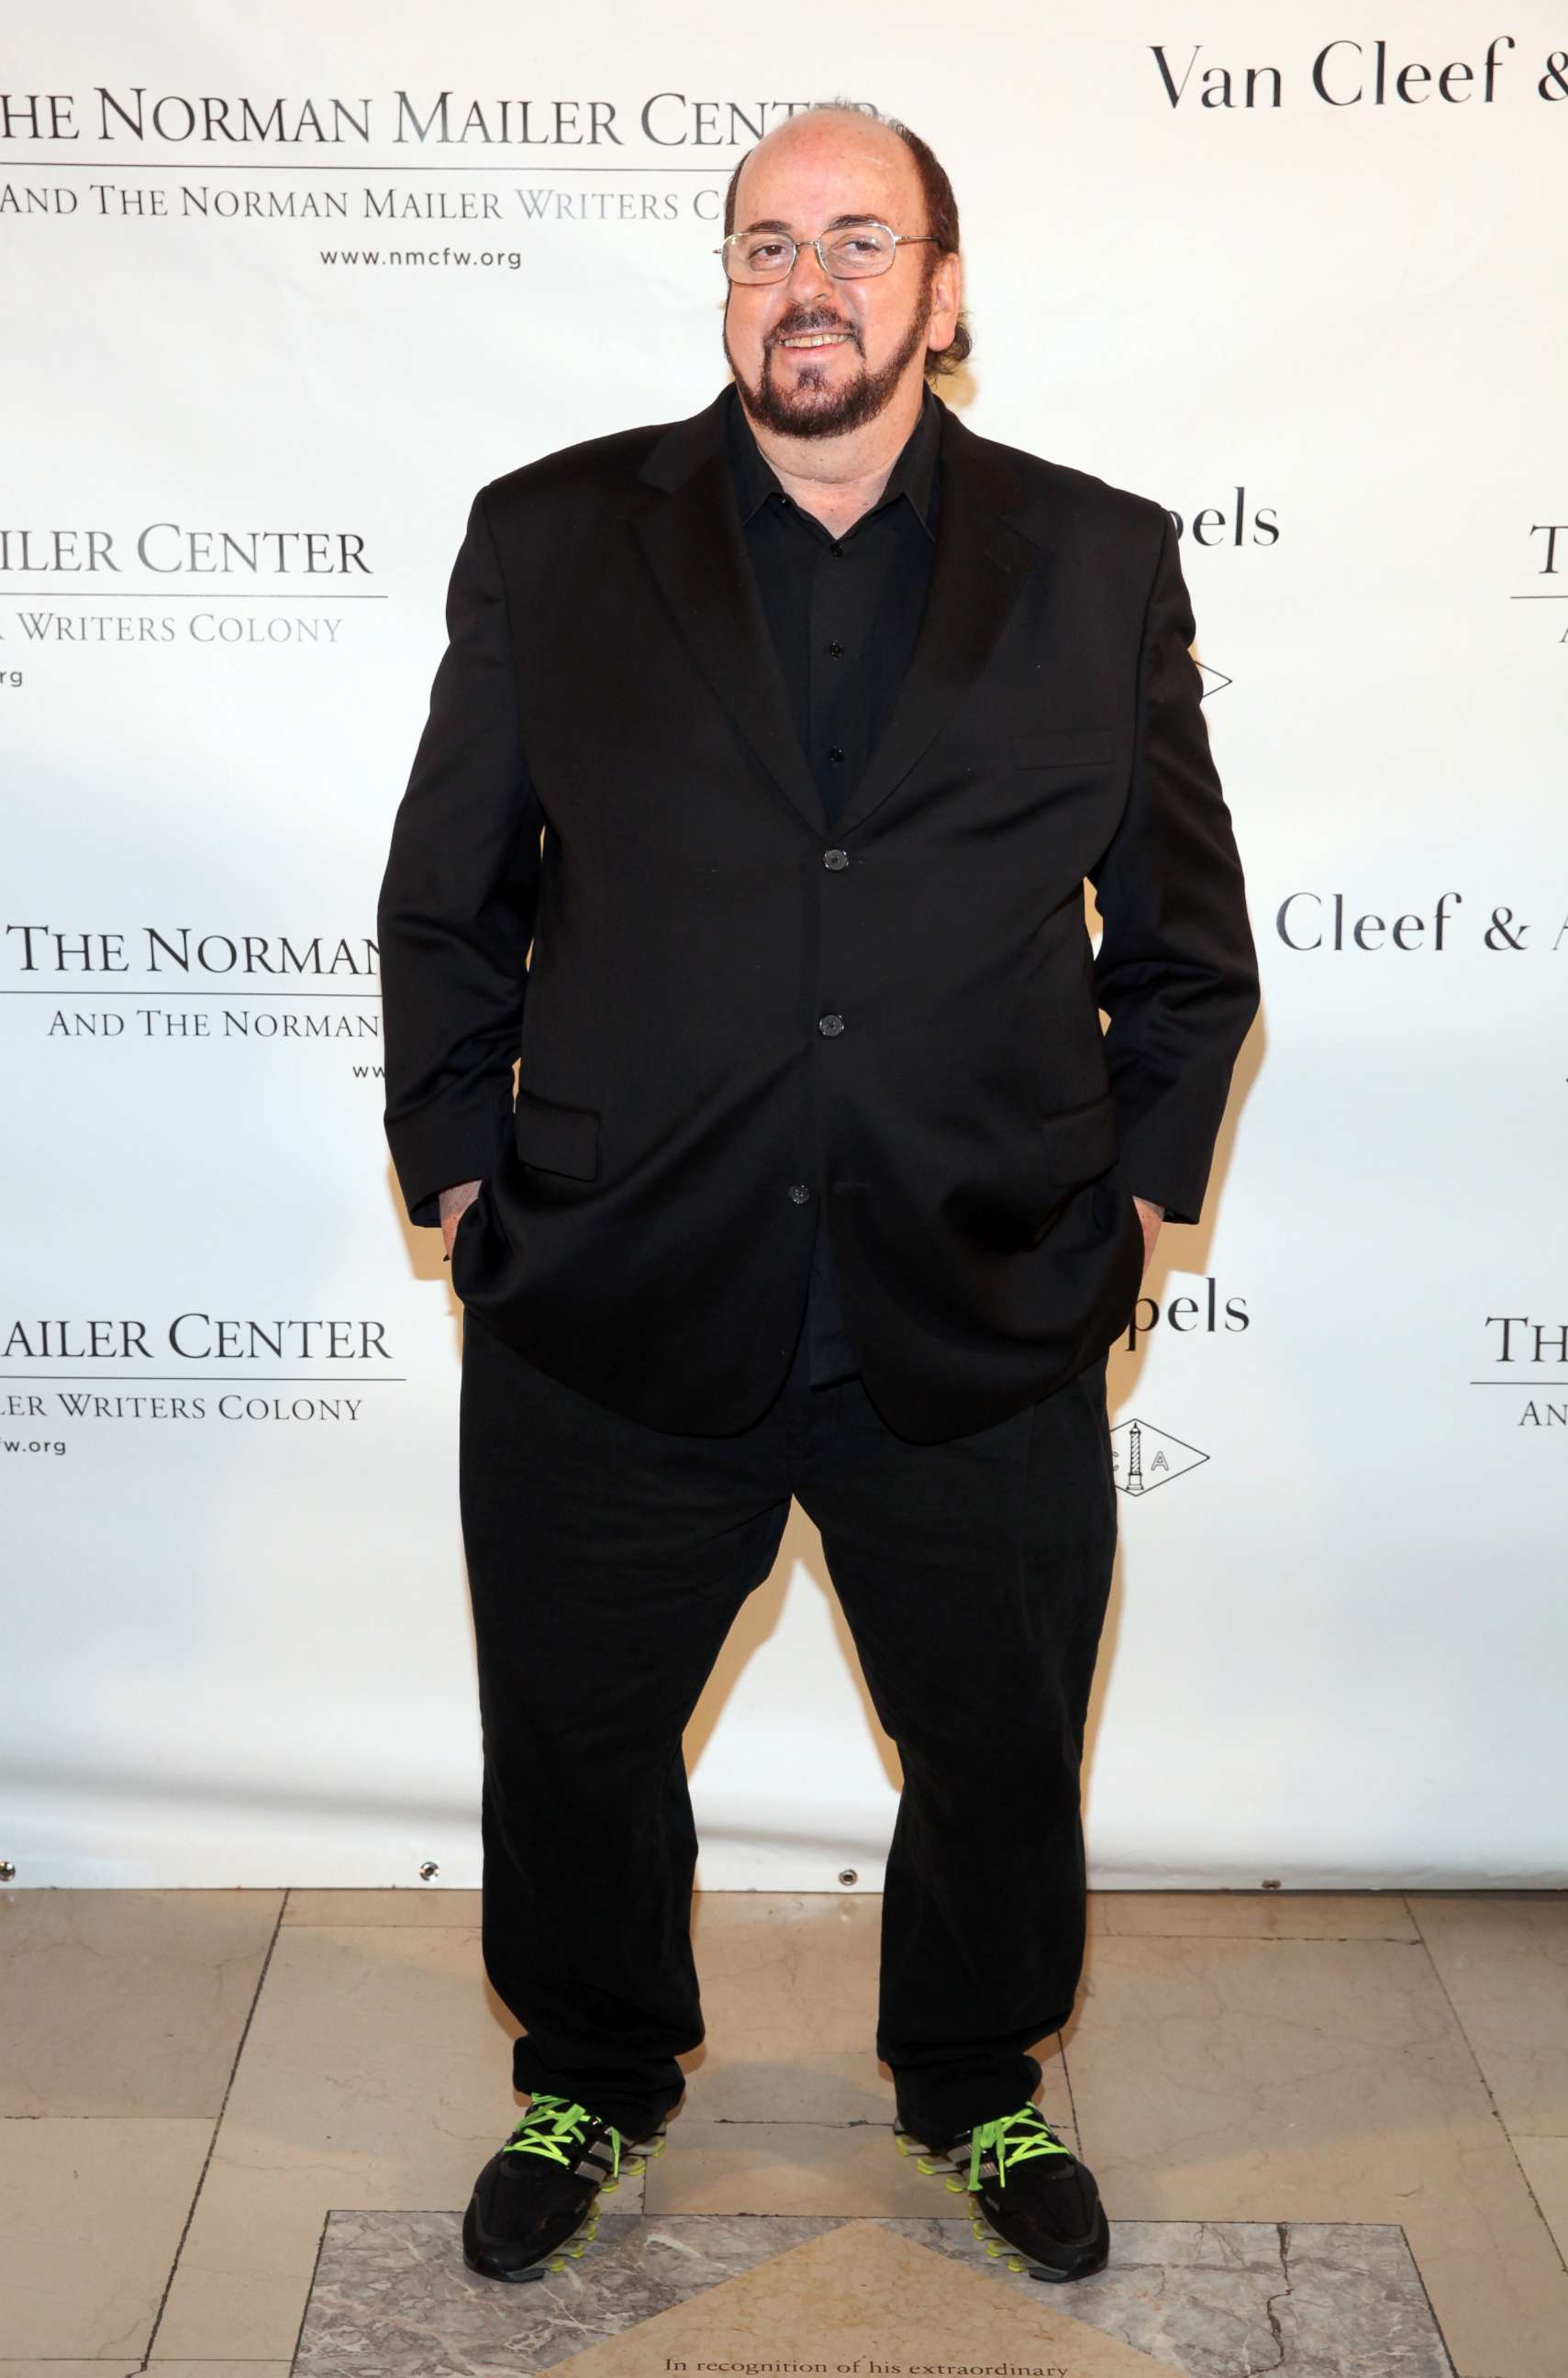 PHOTO: James Toback at the Sixth Annual Norman Mailer Center and Writers Colony Benefit Gala Honoring Don DeLillo, Billy Collins, and Katrina vanden Heuvel at the New York Public Library, Oct. 27, 2014 in New York City.  